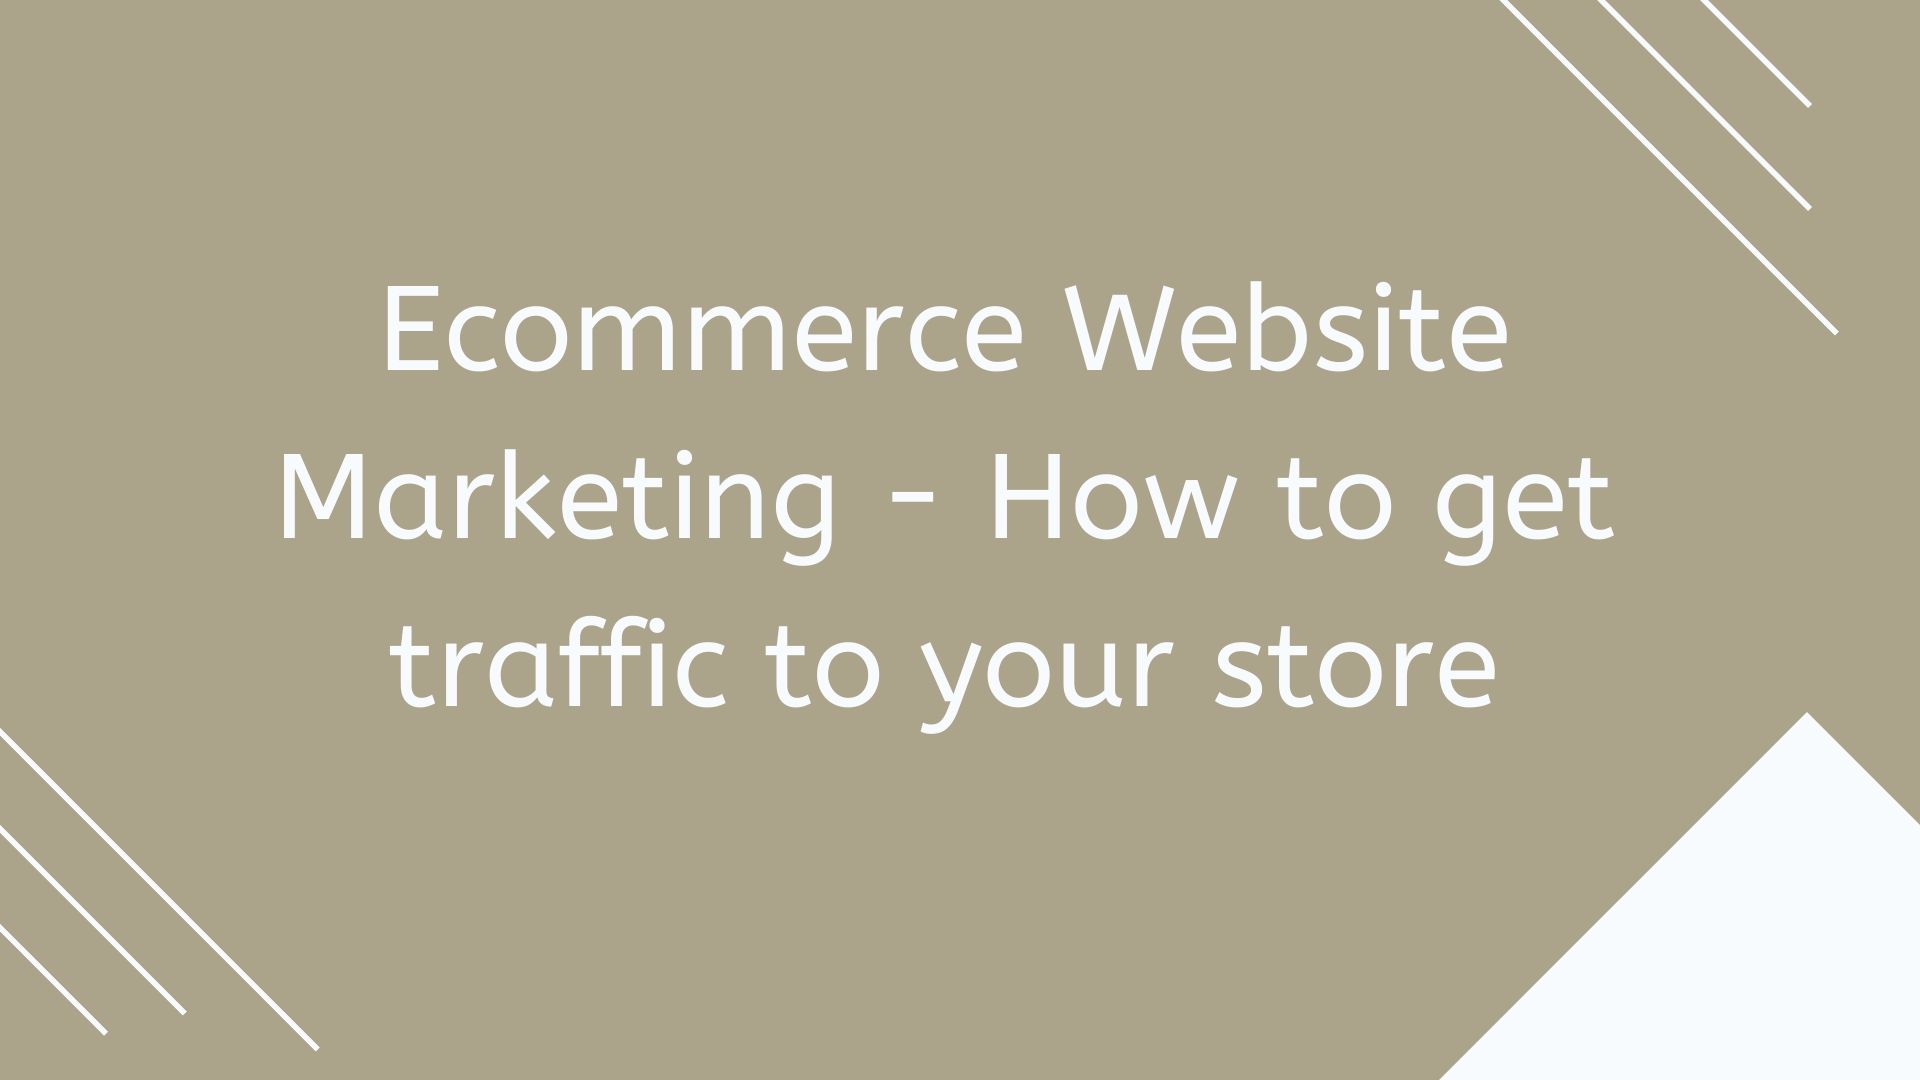 eCommerce Website Marketing - How to get traffic to your store